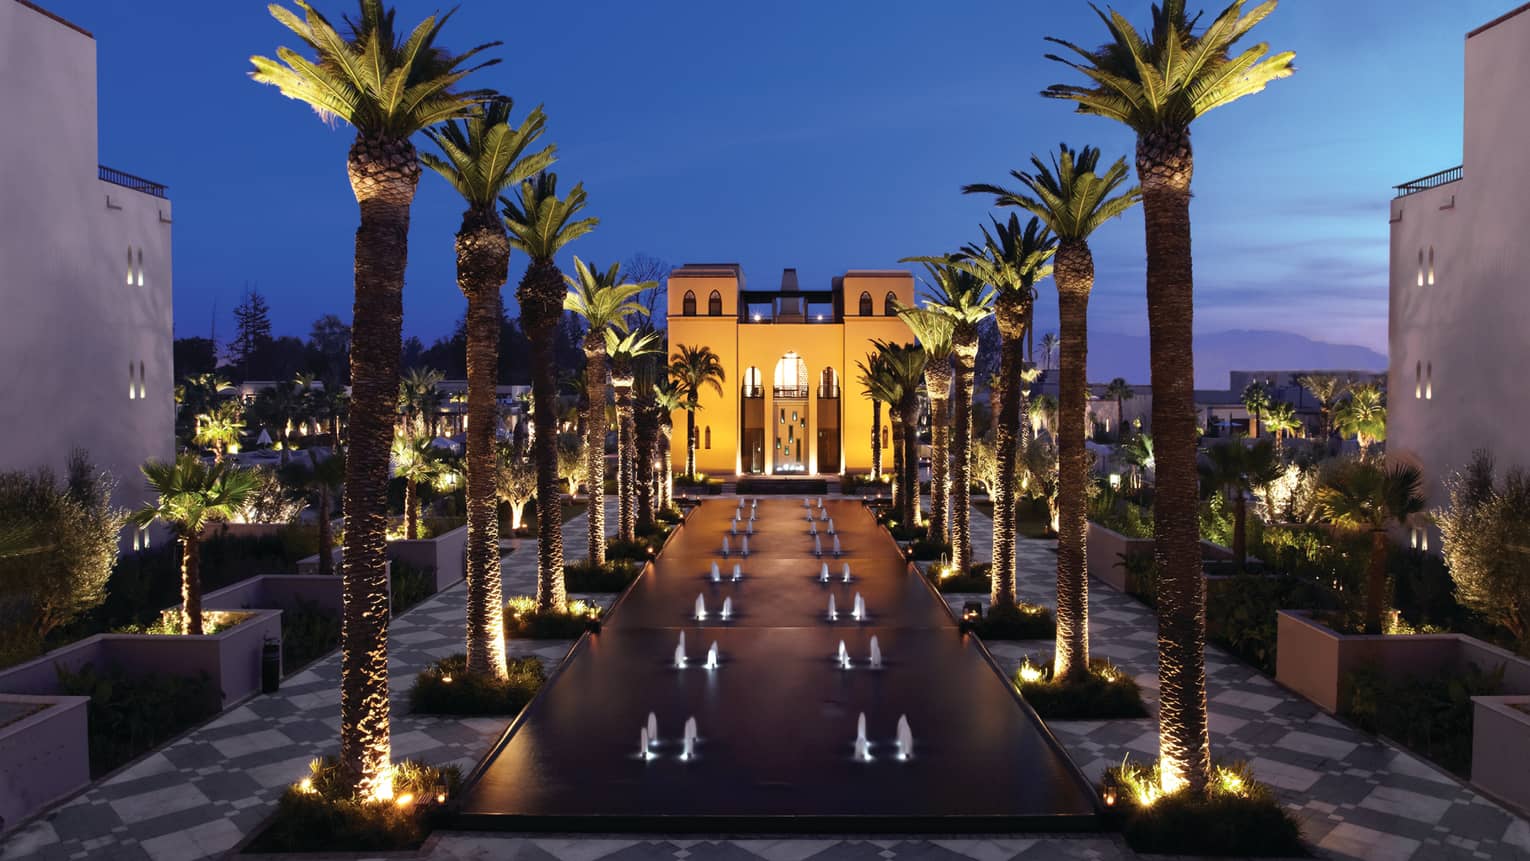 Fountains between rows of tall palm trees in front of illuminated Four Seasons Resort Marrakech hotel at night